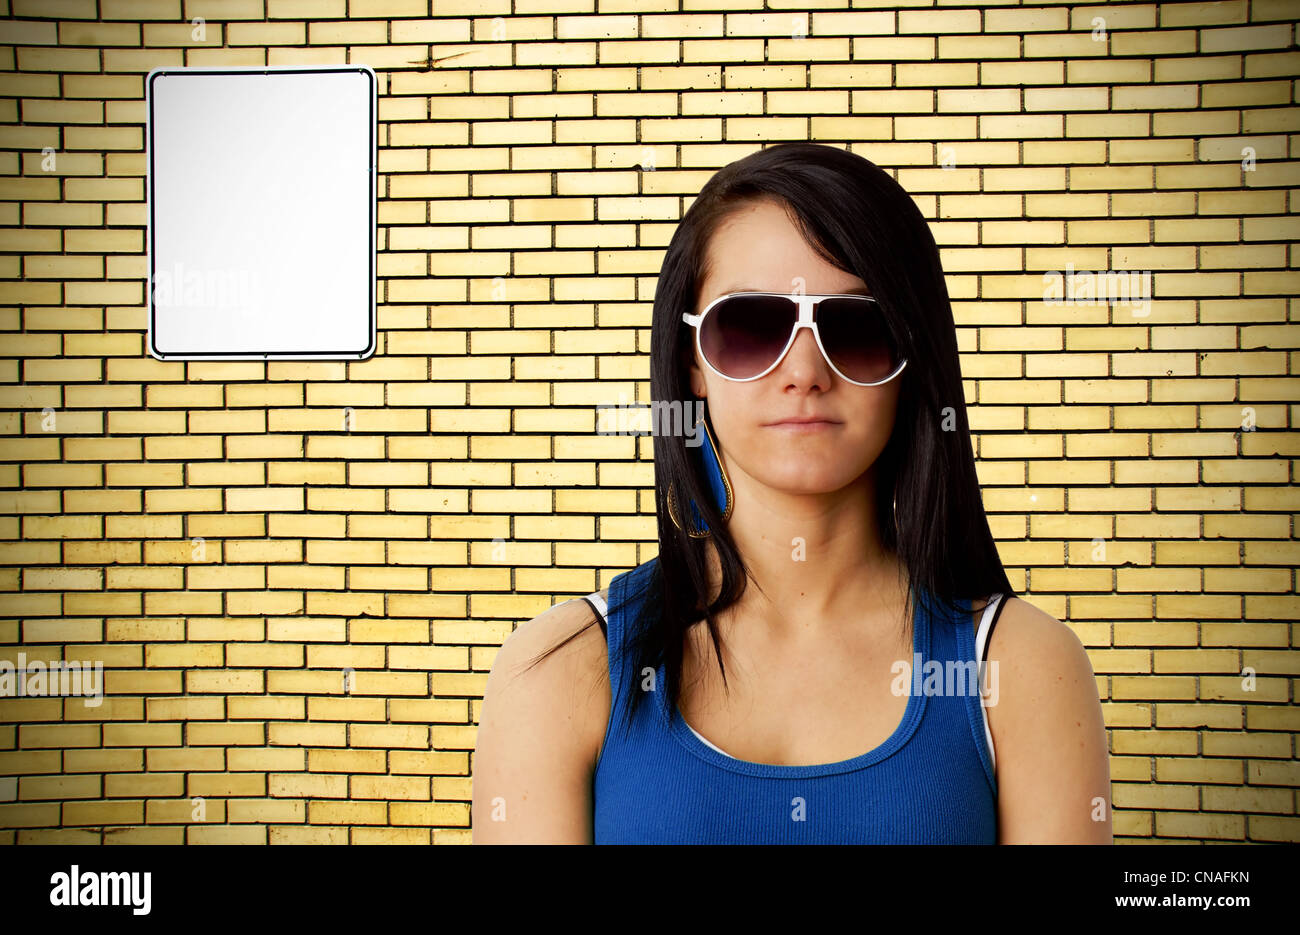 Tough looking young brunette woman with large sunglasses in front of brick wall with blank white sign Stock Photo